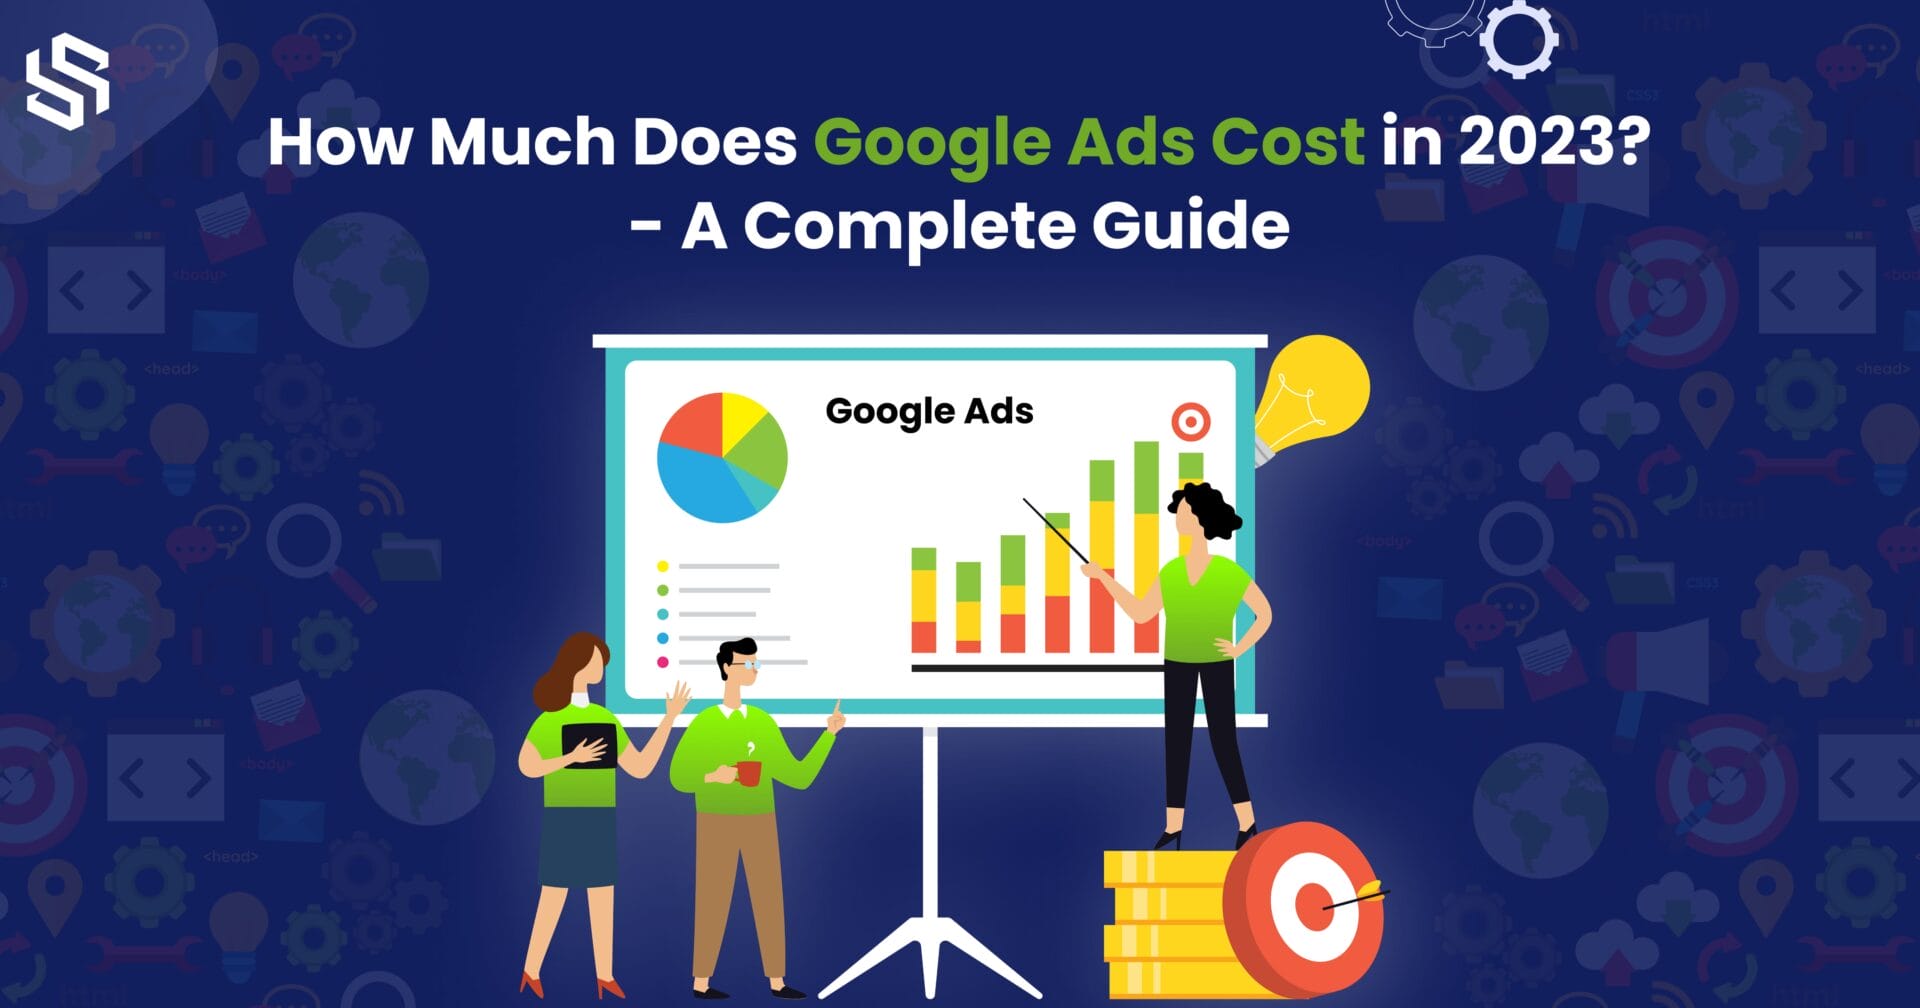 How Much Does Google Ads Cost in 2023 - A Complete Guide